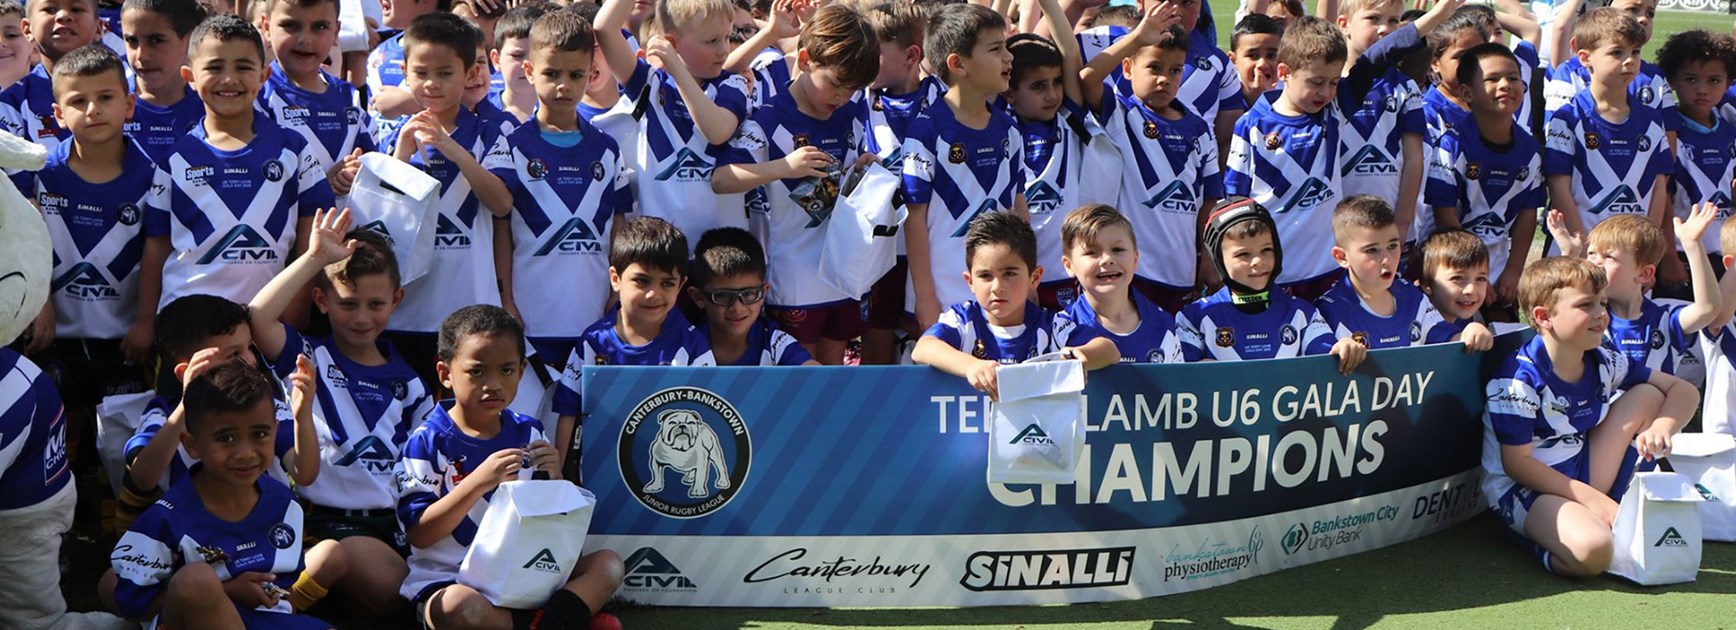 Terry Lamb U6s Gala Day Launched at Belmore